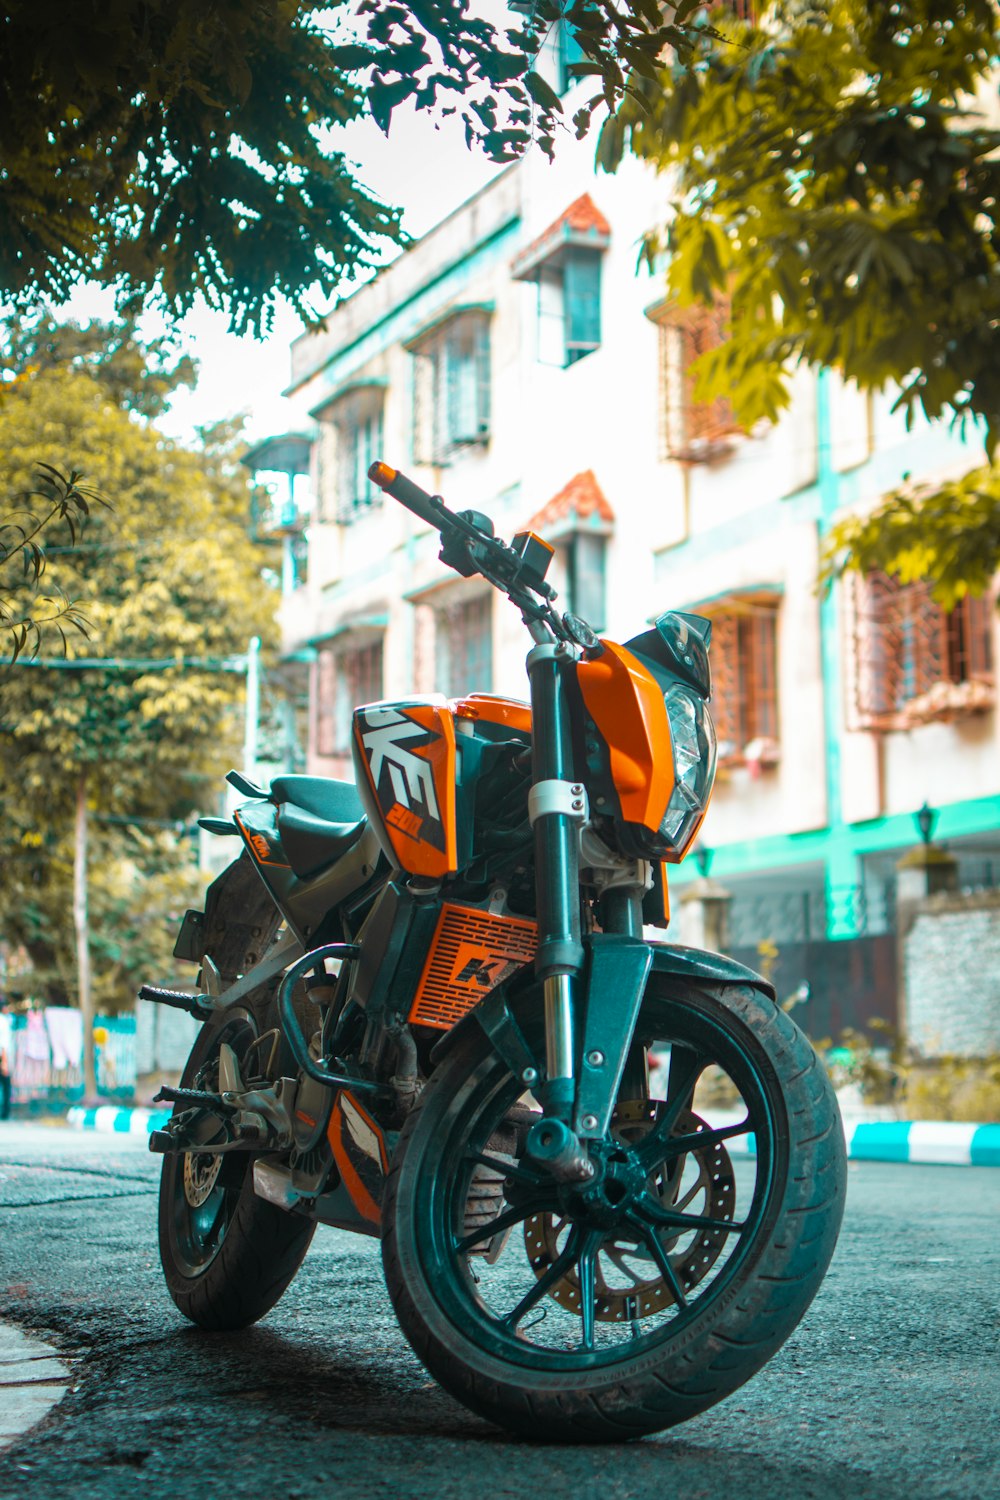 parked motorcycle